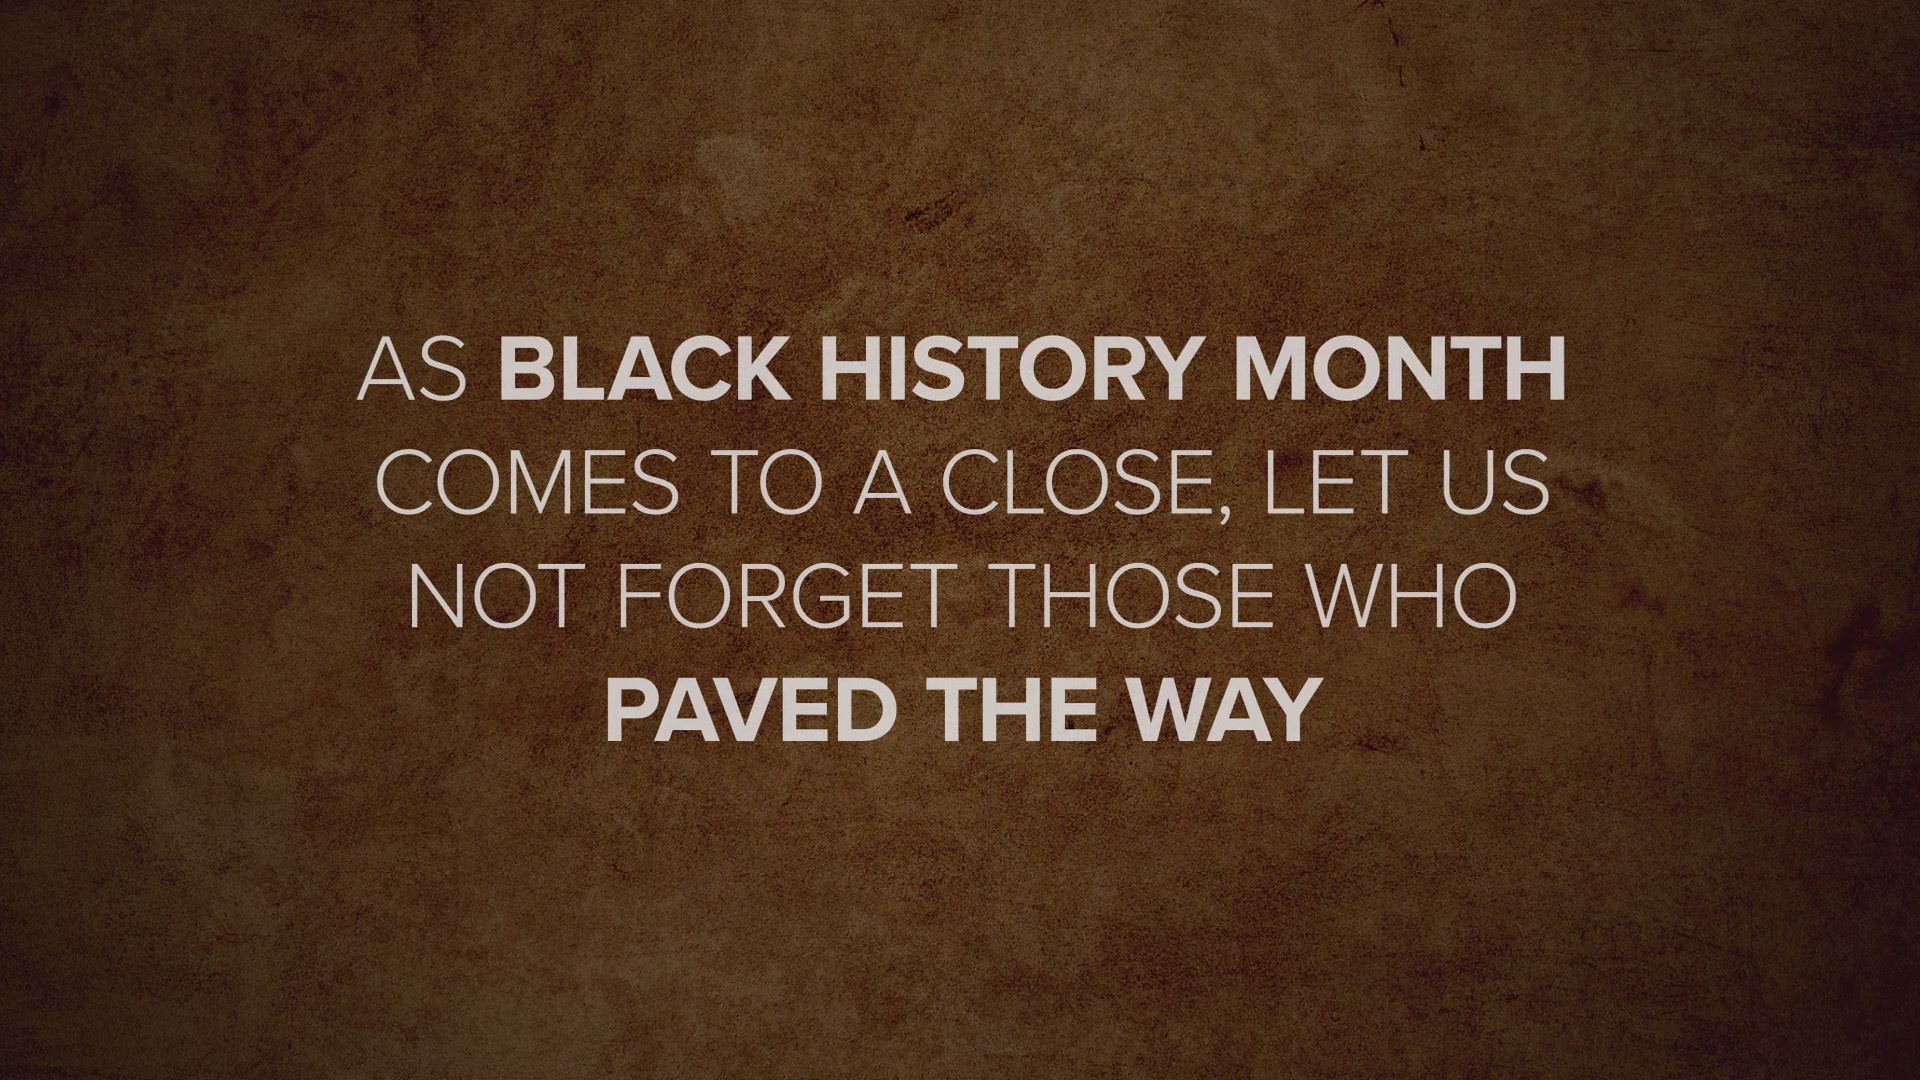 As Black History Month draws to a close, we remember some of those who made an invaluable impact.